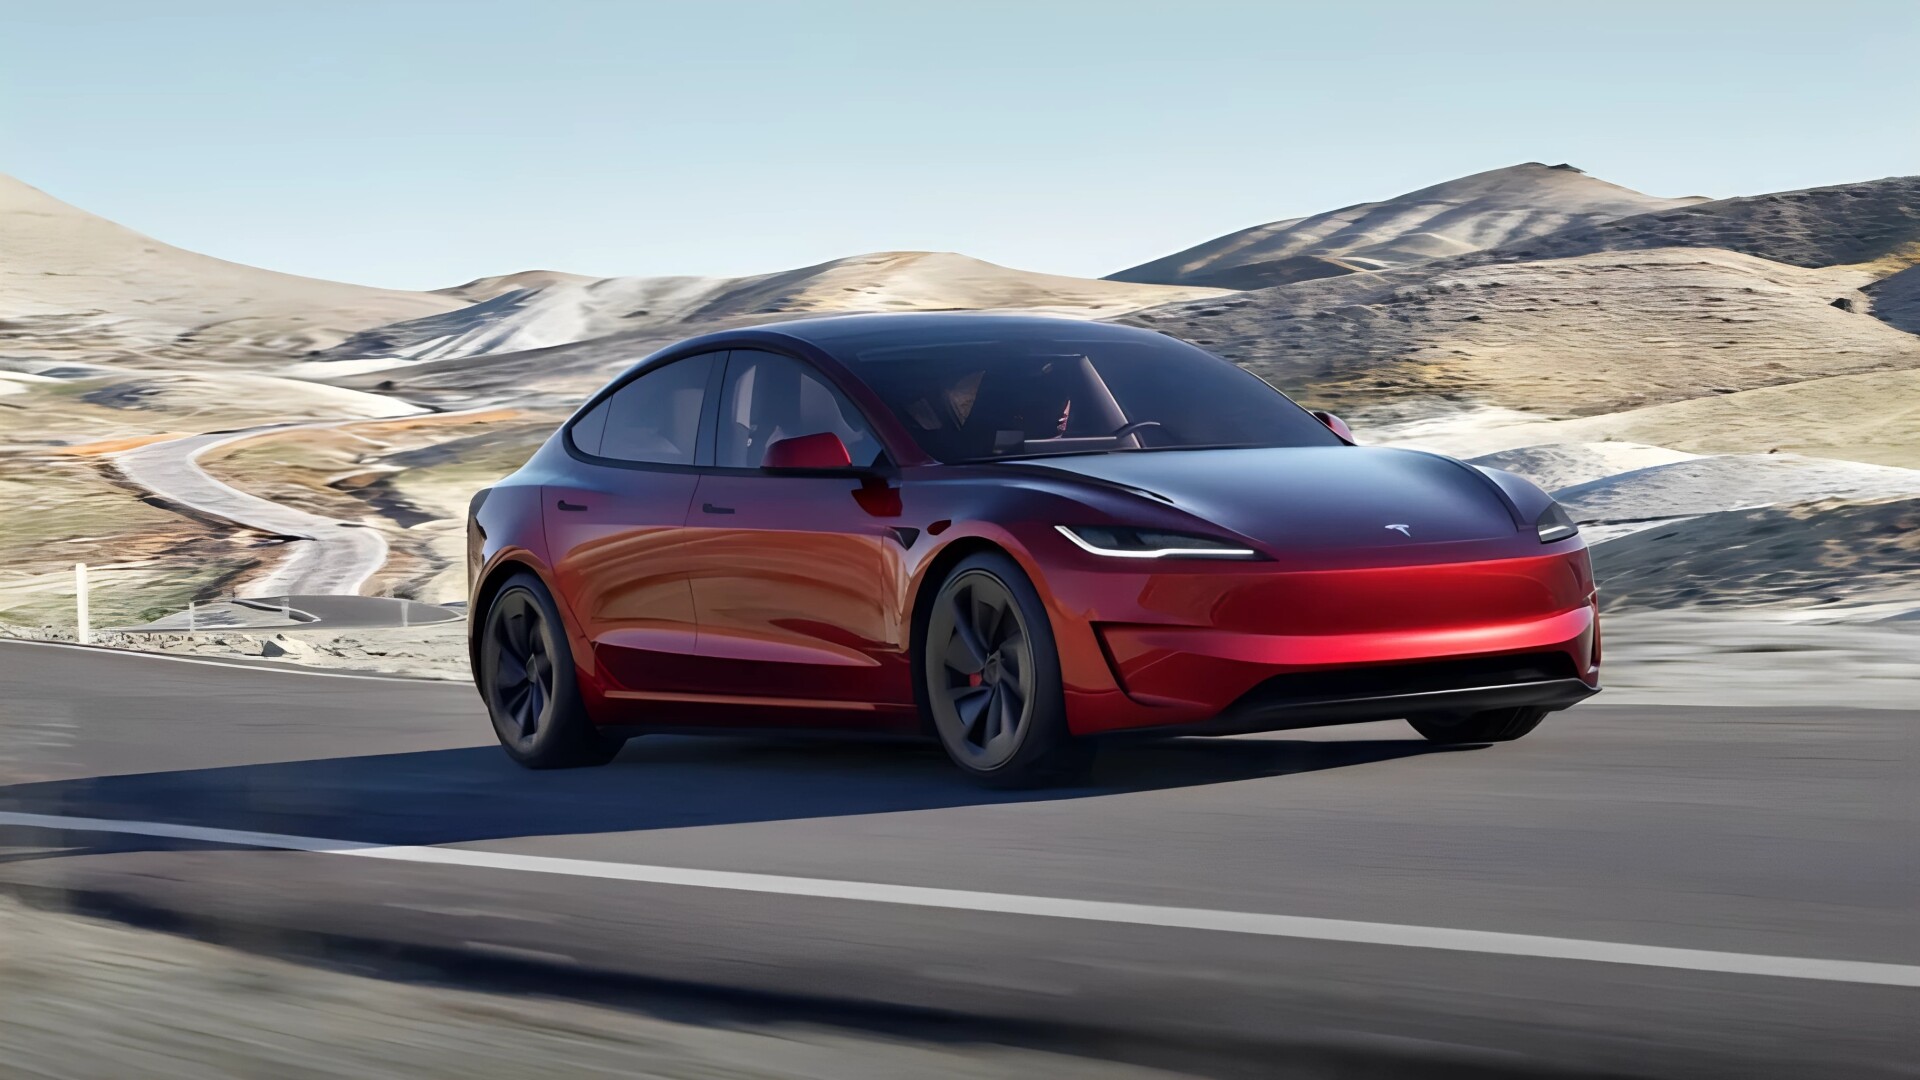 The Side Profile Of The Updated Tesla Model 3 Performance (Credits Tesla)